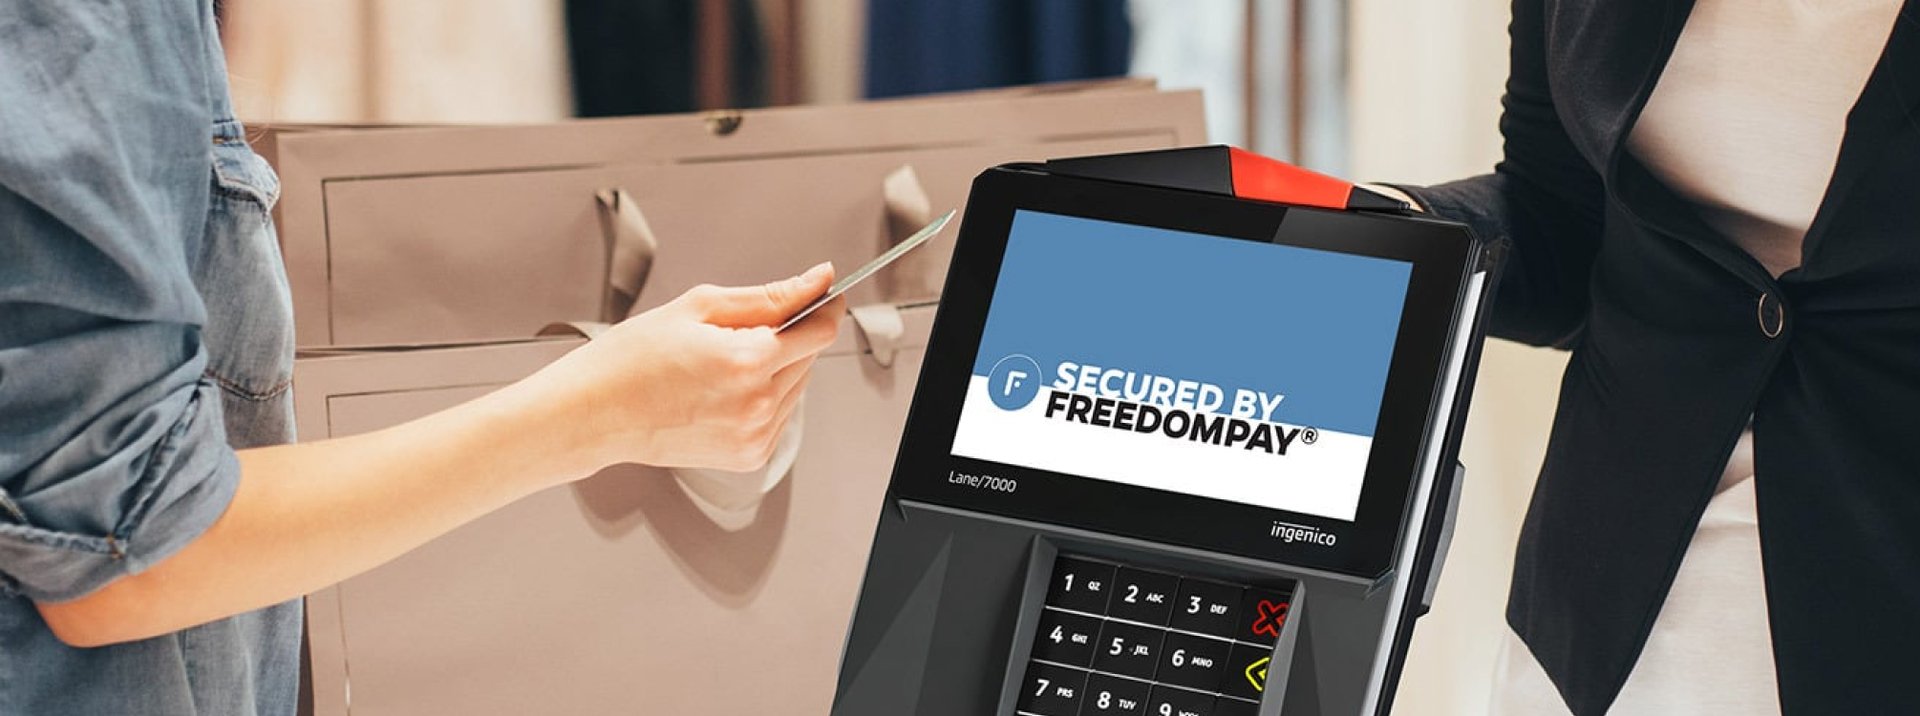 Freedompay quote